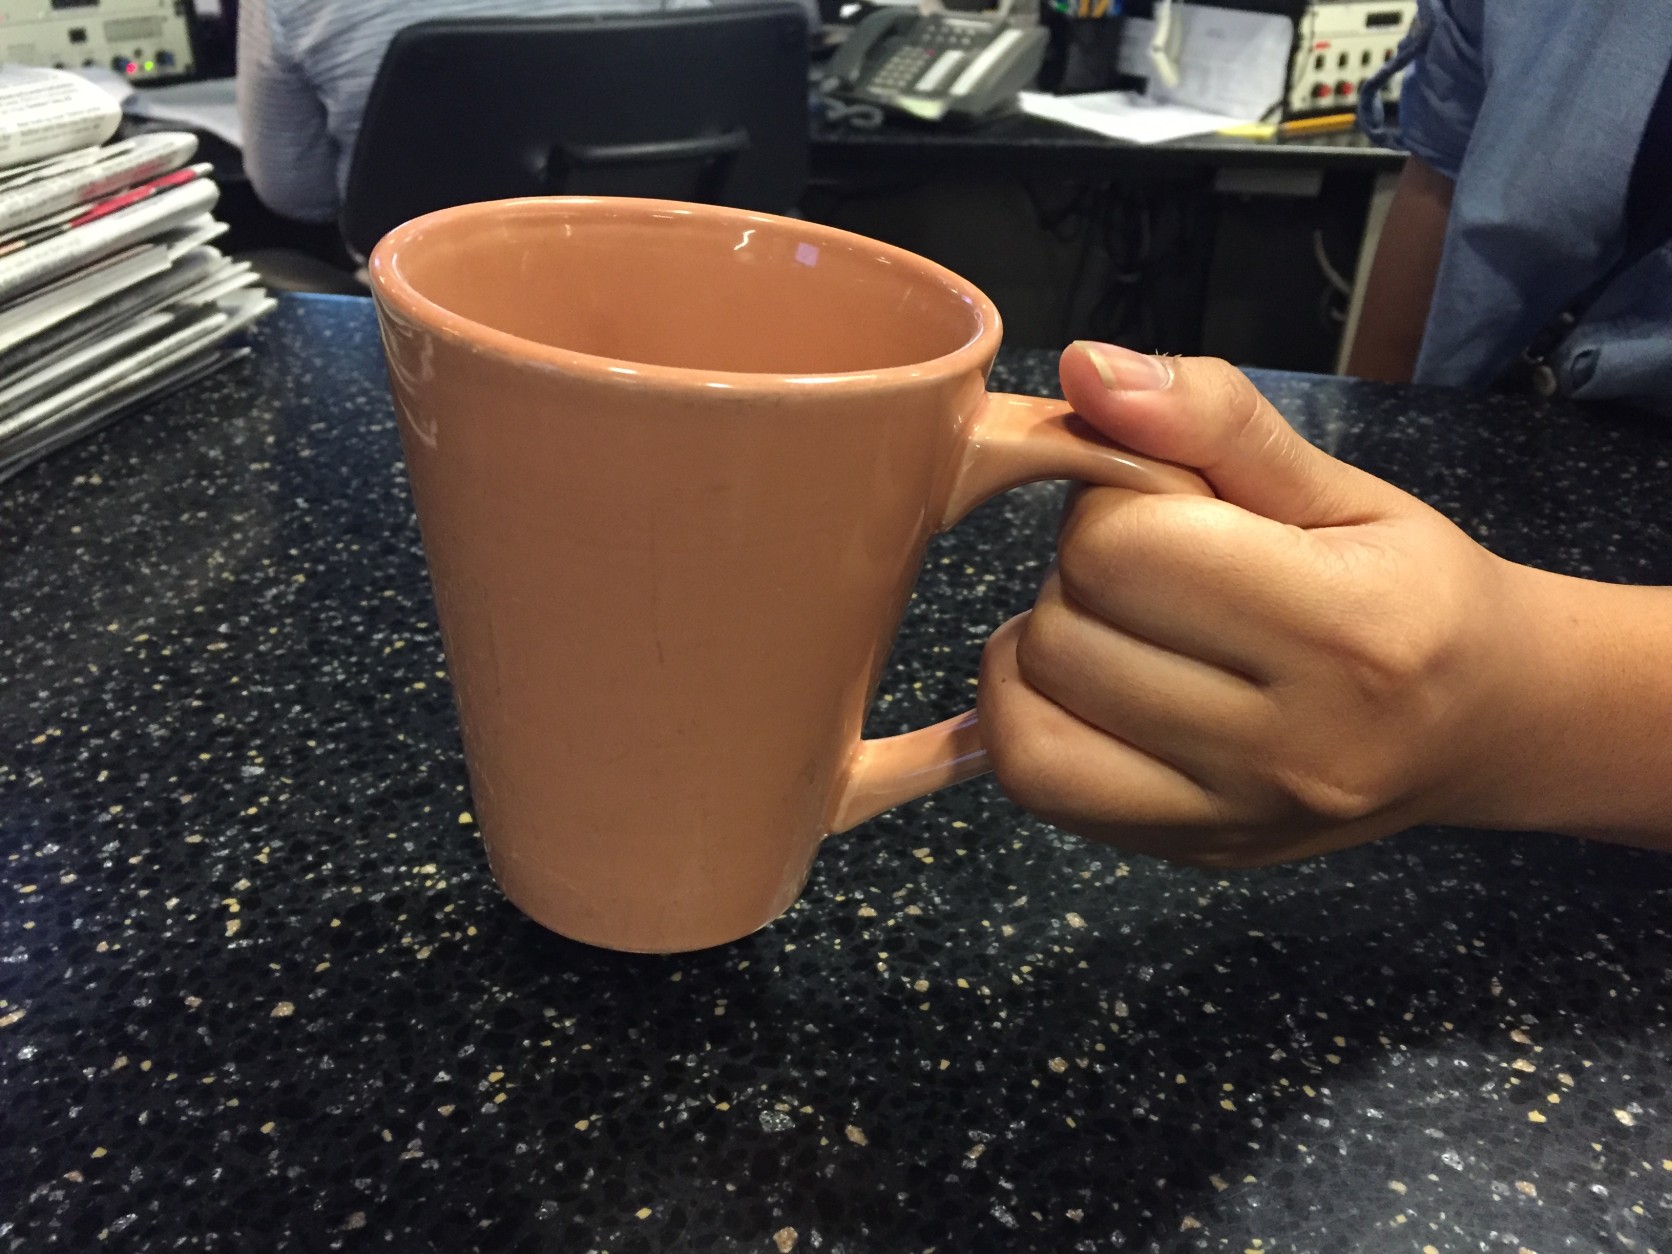 The usual way of holding a coffee cup while walking may not be the best way to avoid spills. (WTOP/Michelle Basch)